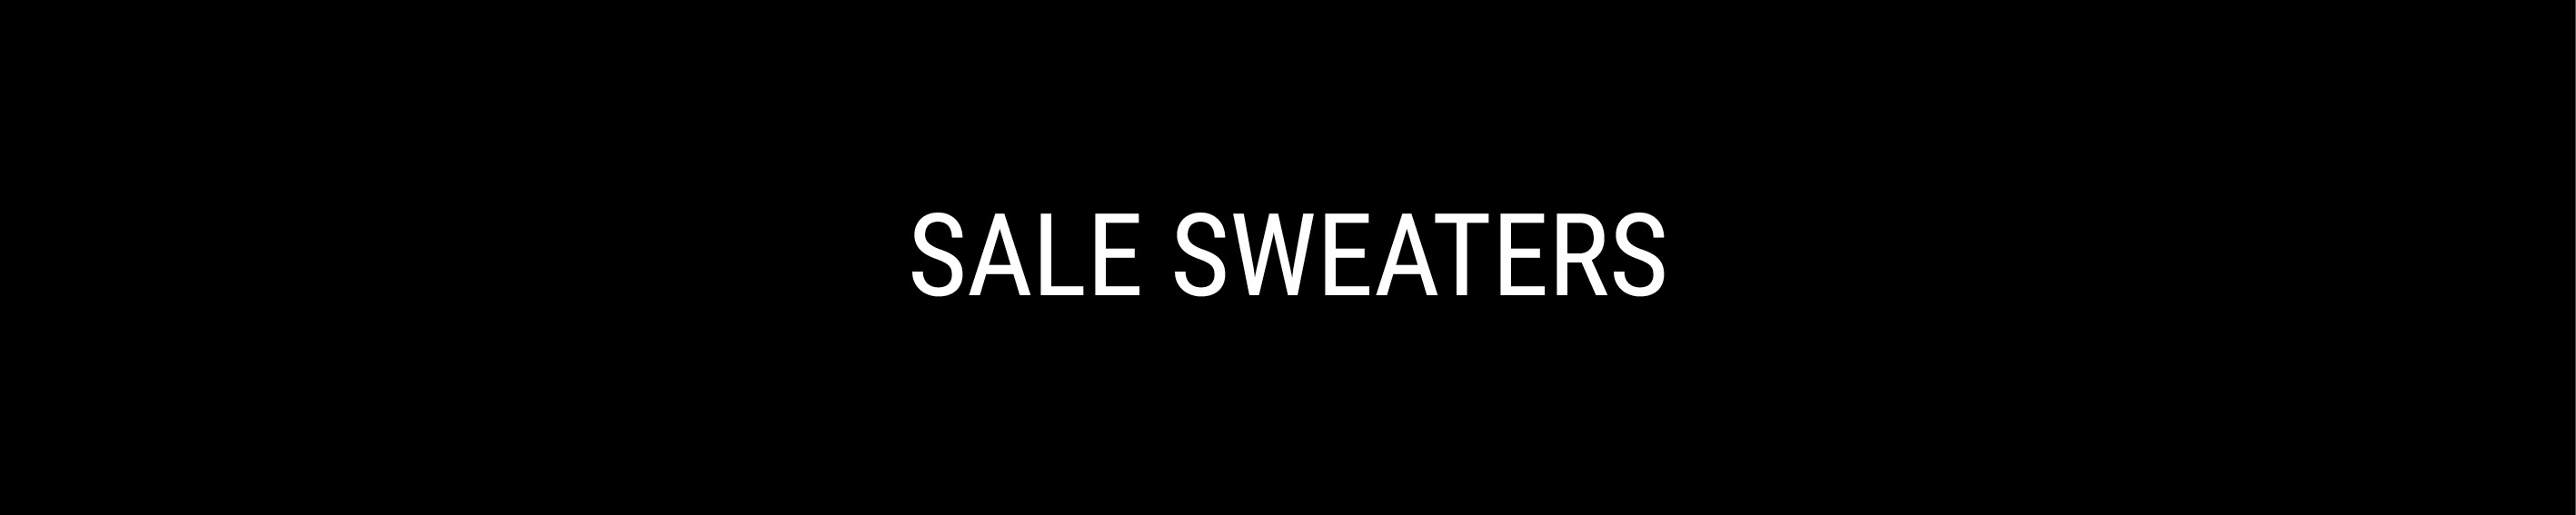 Sweatshirts Sweaters and Jumpers on Sale